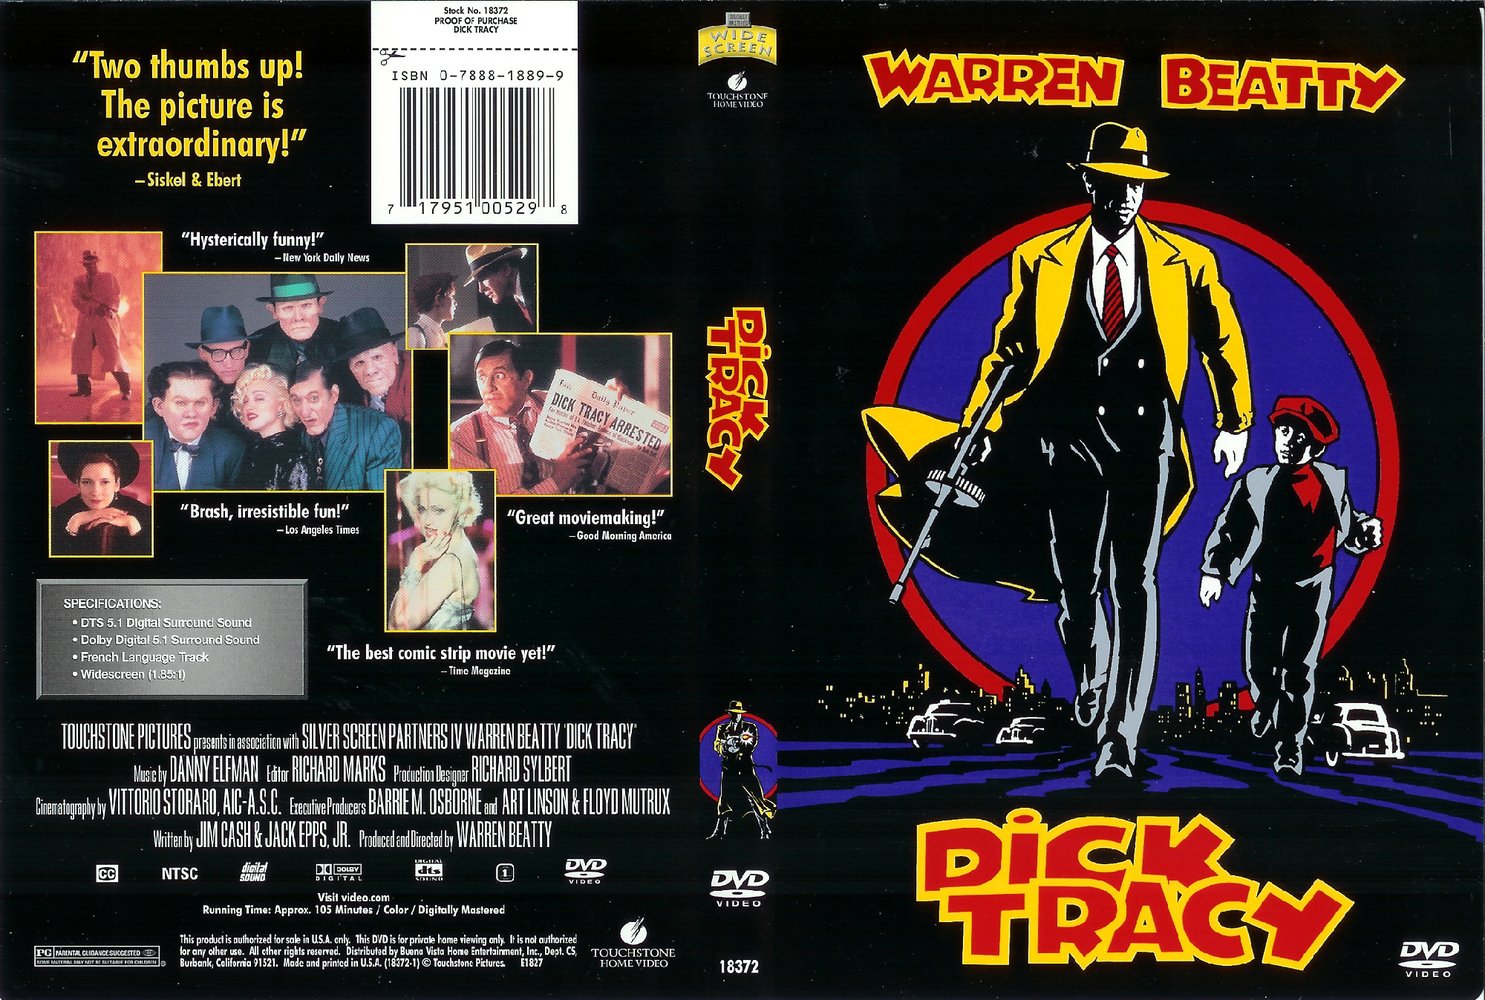 Dick tracy movie review new york times